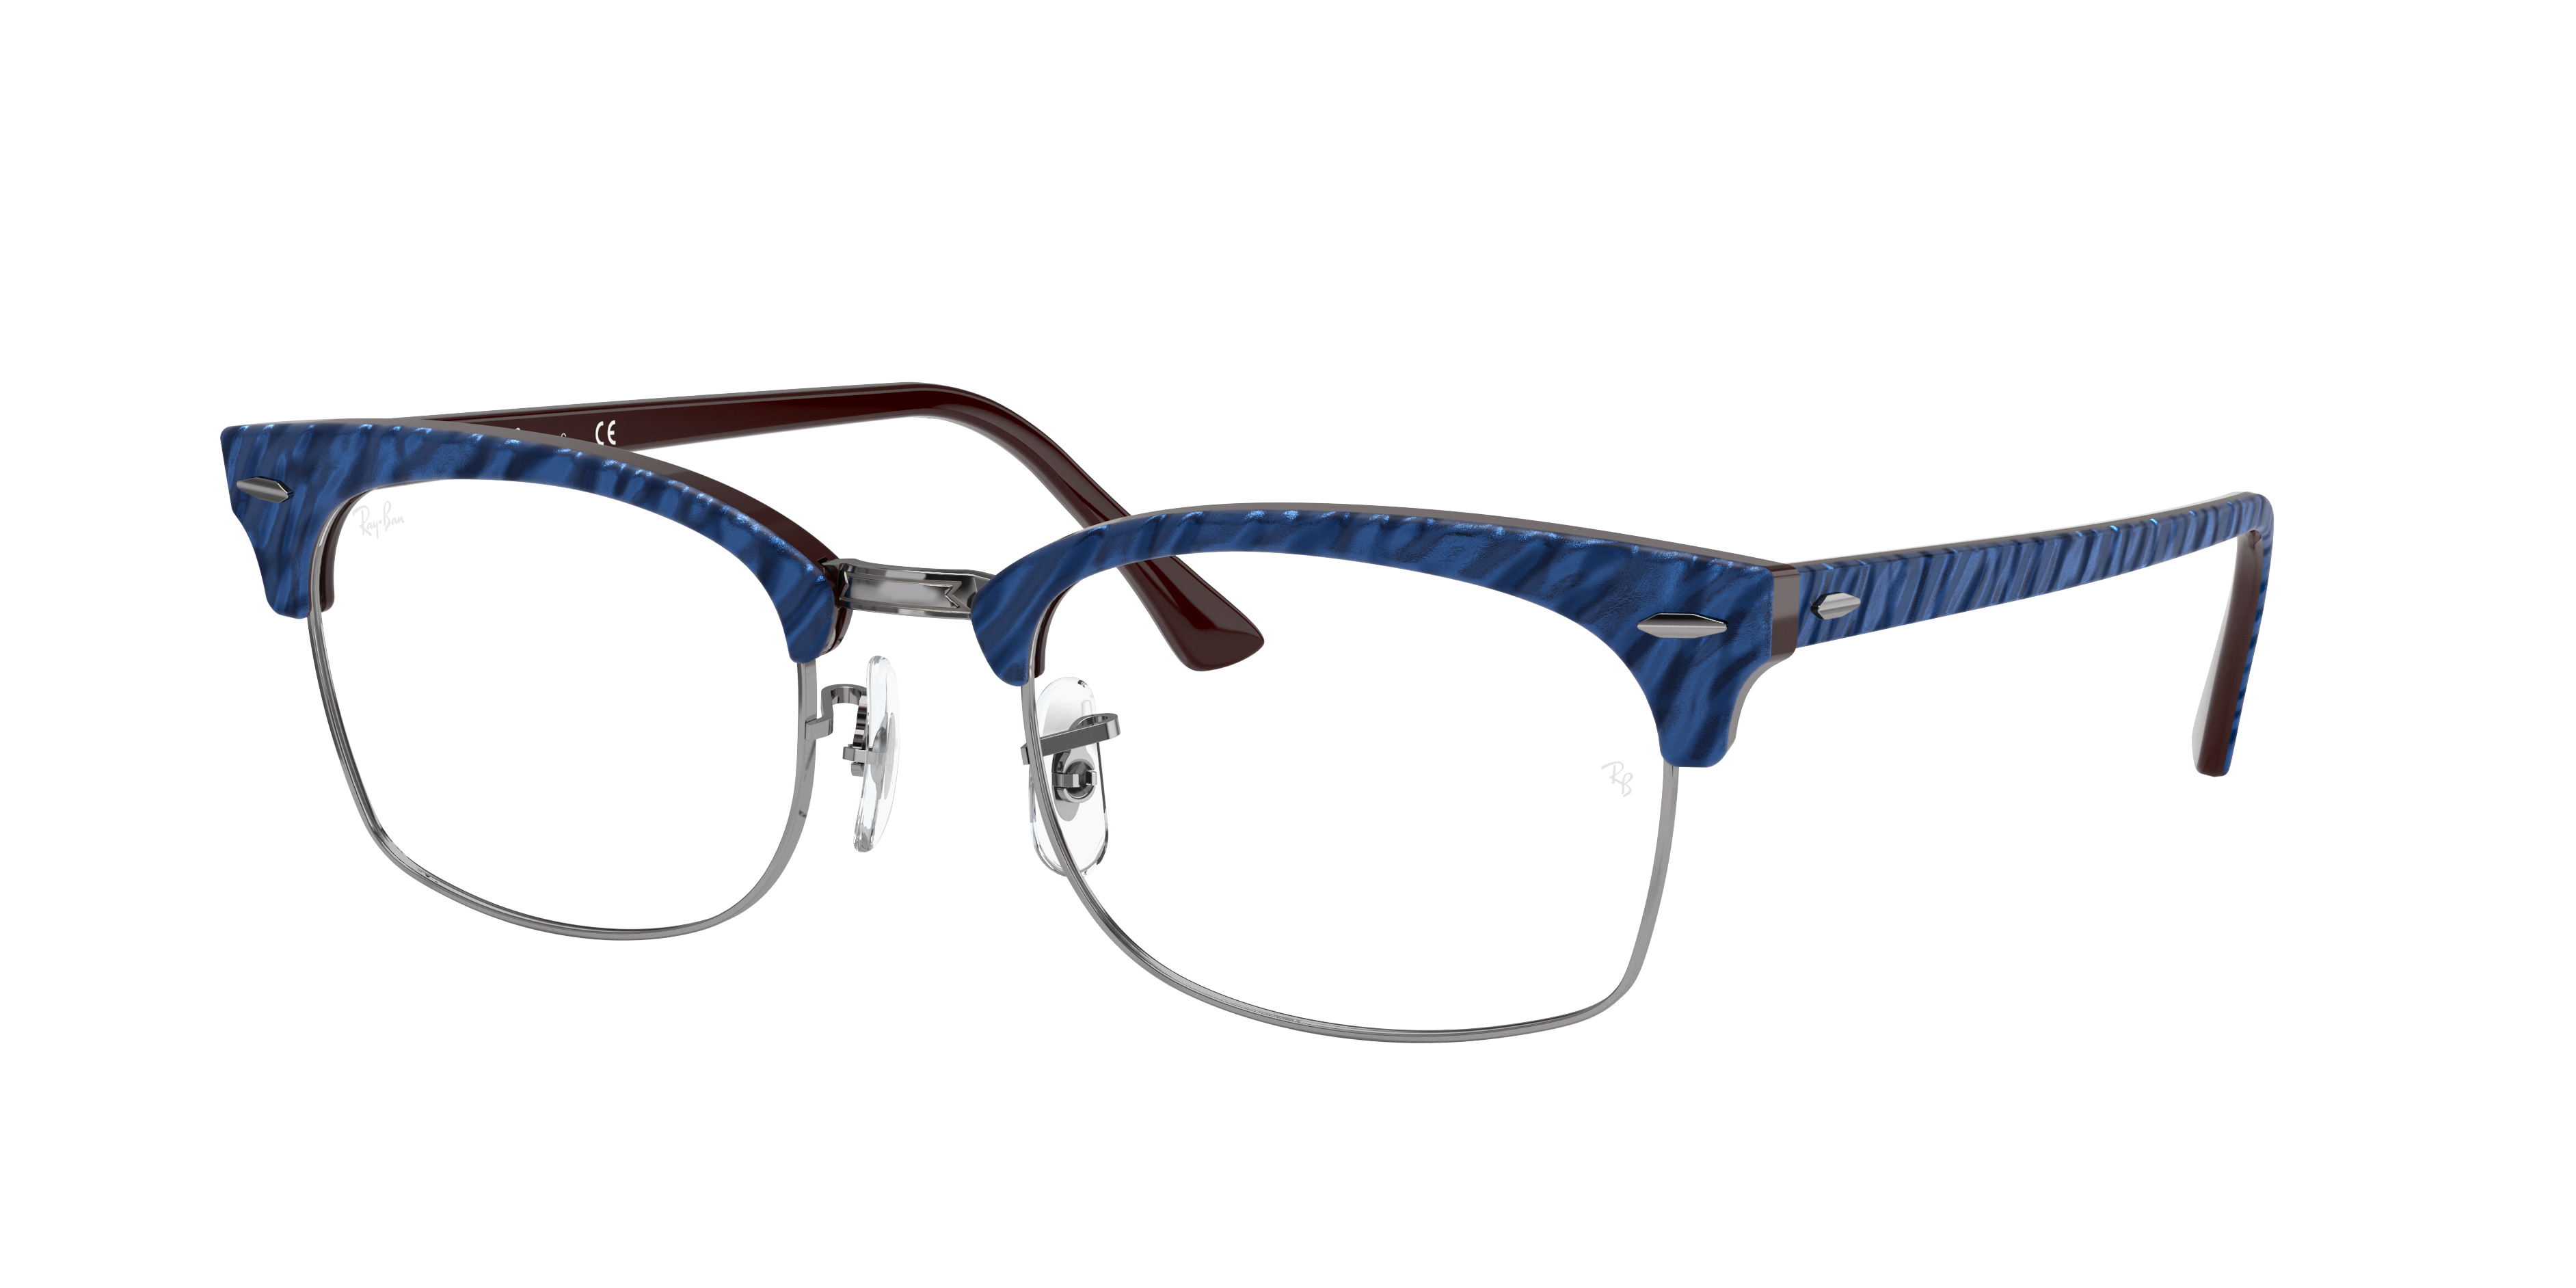 Clubmaster Square Optics Eyeglasses with Blue Frame | Ray-Ban®